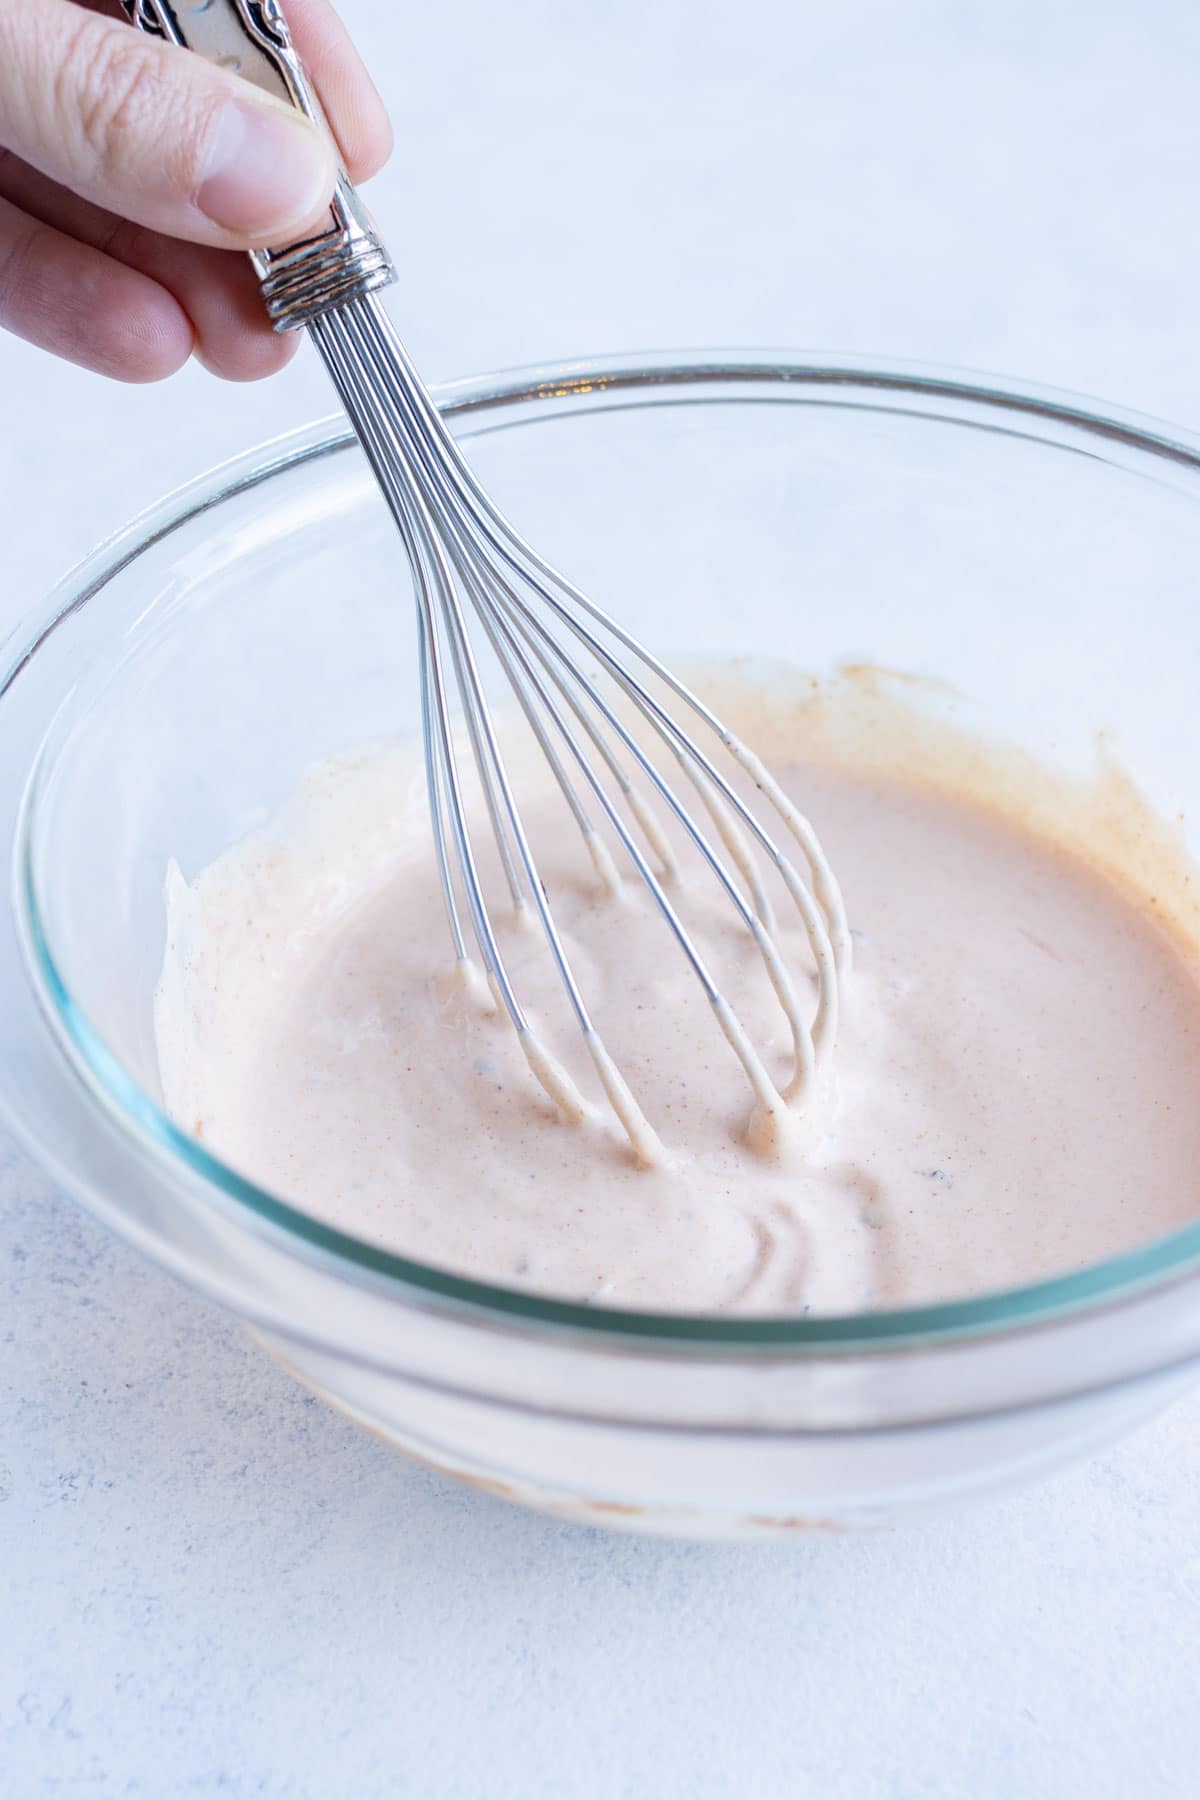 Whisk is used to combine all the ingredients until smooth.